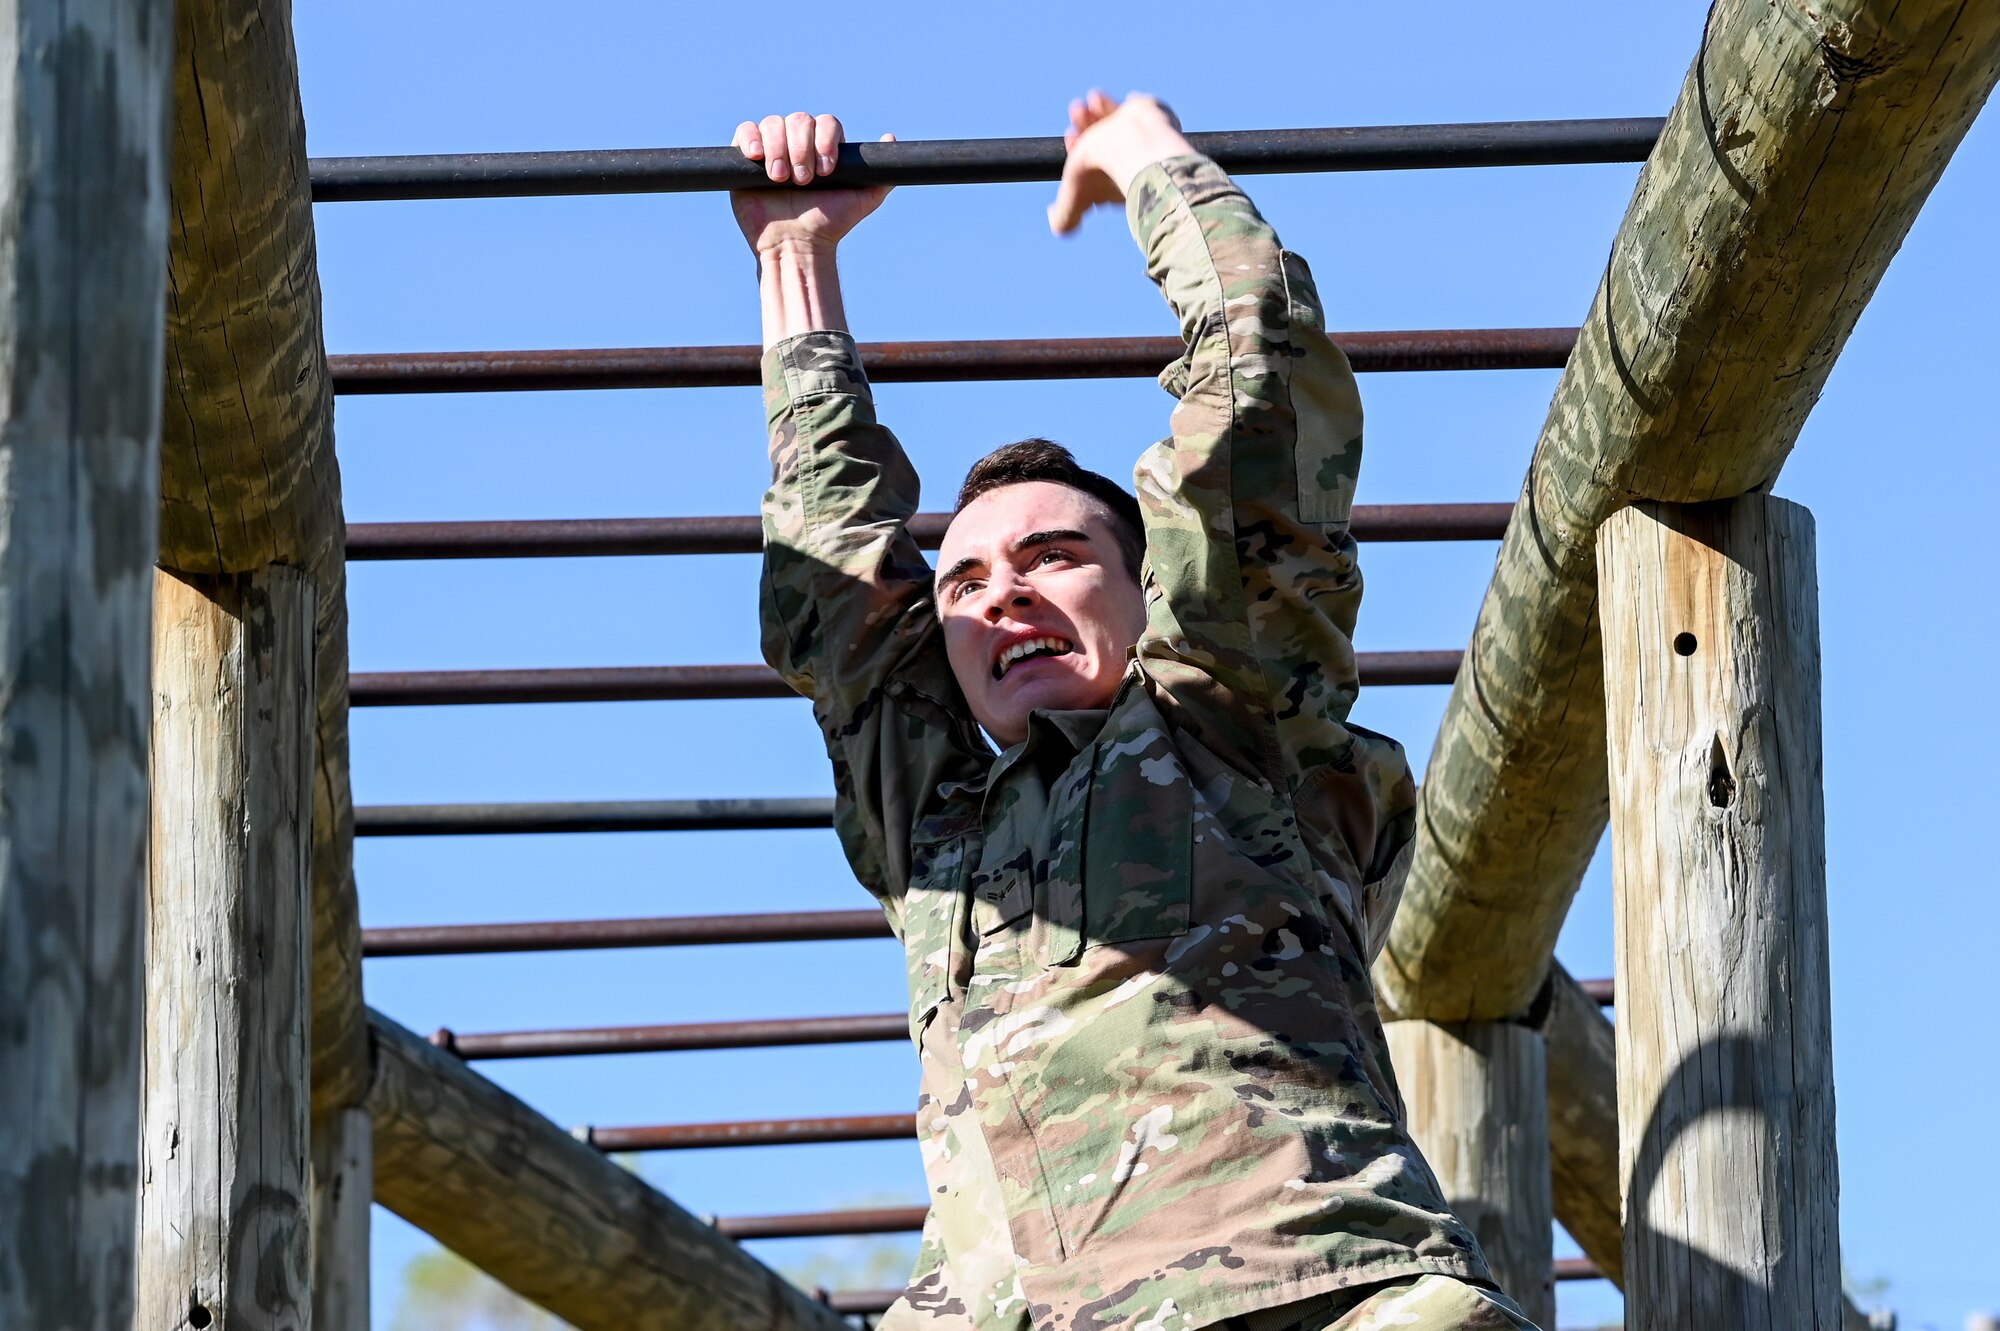 Airman 1st Class Justin Dunlevy, 75th Security Forces Squadron, runs through the monkey bars in the National Police Week obstacle course competition May 11, 2021, at Hill Air Force Base, Utah. The obstacle course competition was one of many events 75th SFS hosted to commemorate the week to honor the sacrifices of the law enforcement community. (U.S. Air Force photo by Cynthia Griggs)